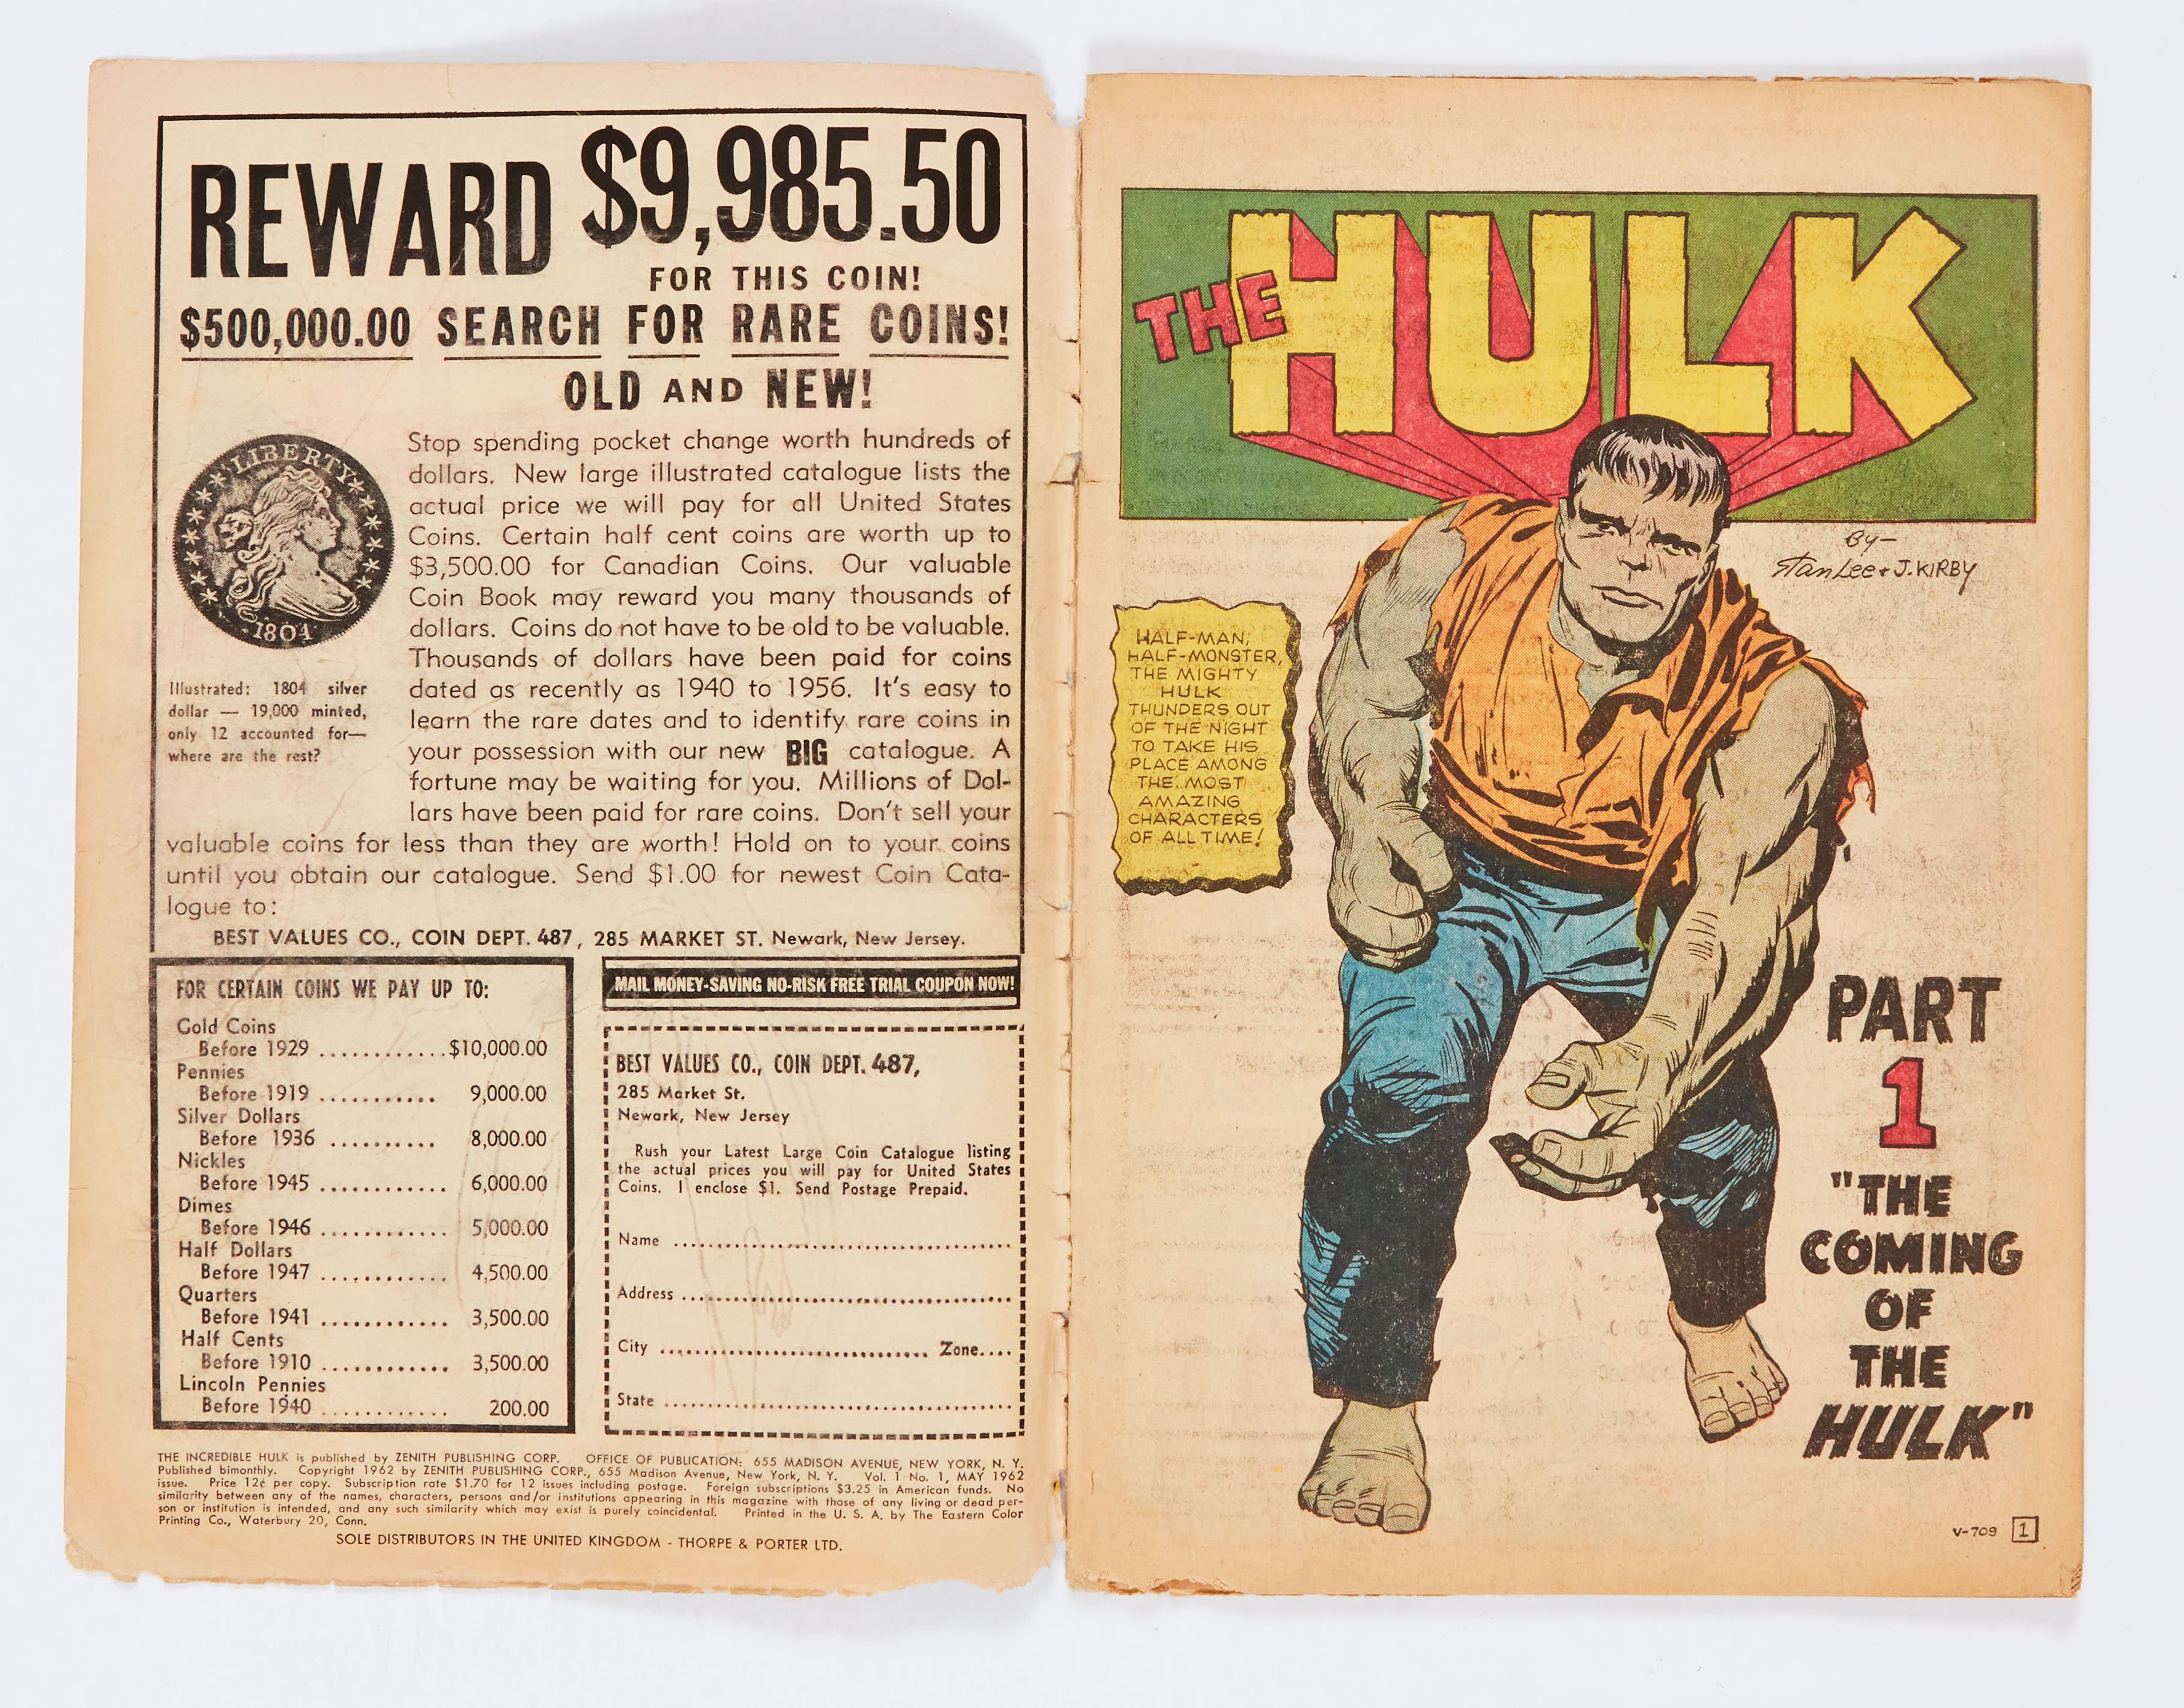 Incredible Hulk 1 (1962) Well worn spine with narrow bottom edge bug chew 1" long either side of spi - Image 3 of 6